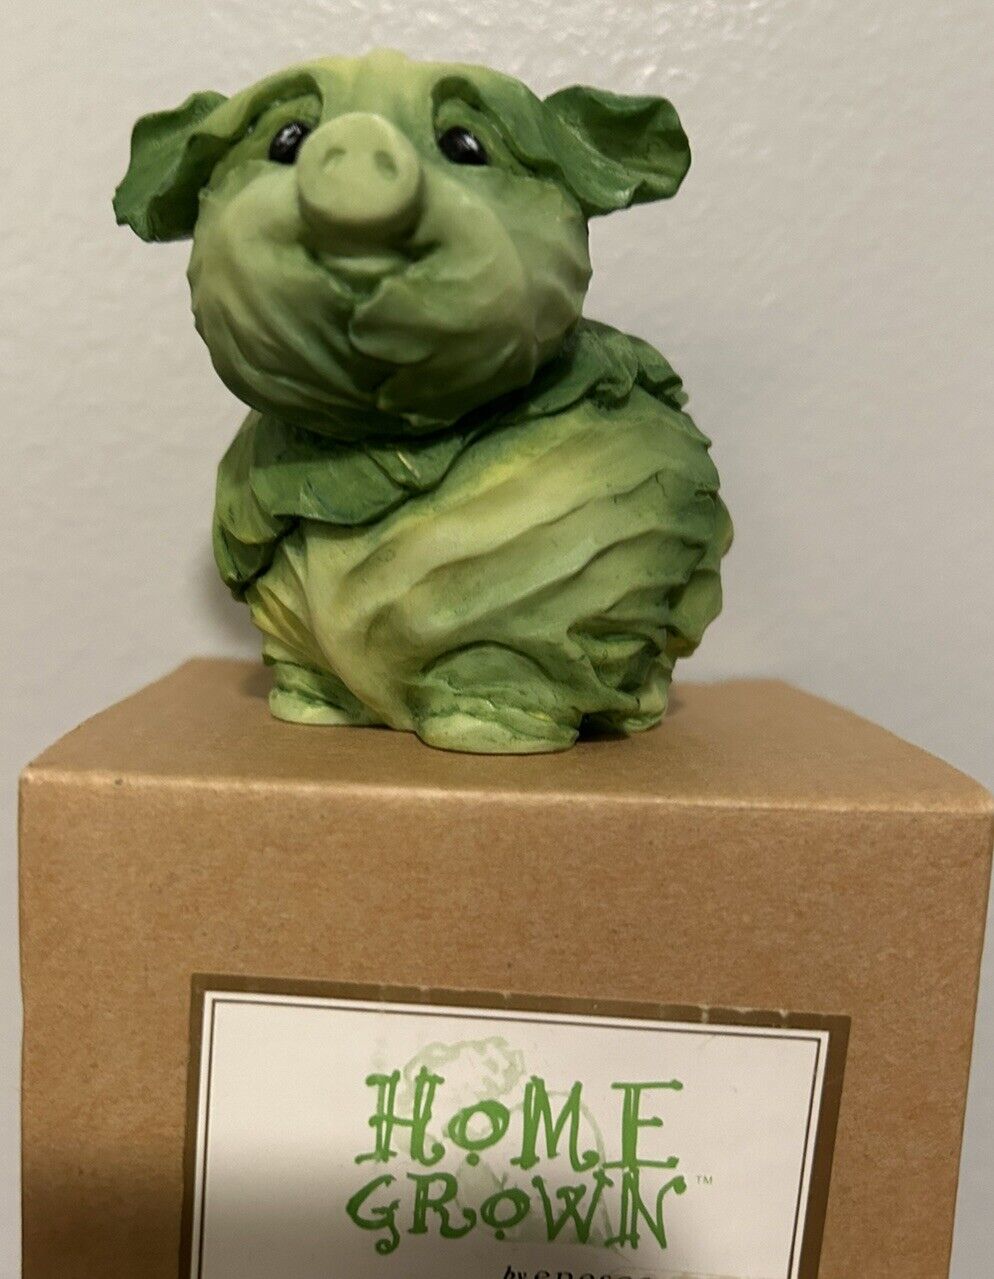 2008 Enesco Home Grown Cabbage Piglet Figurine #4012371 Brand New In Box